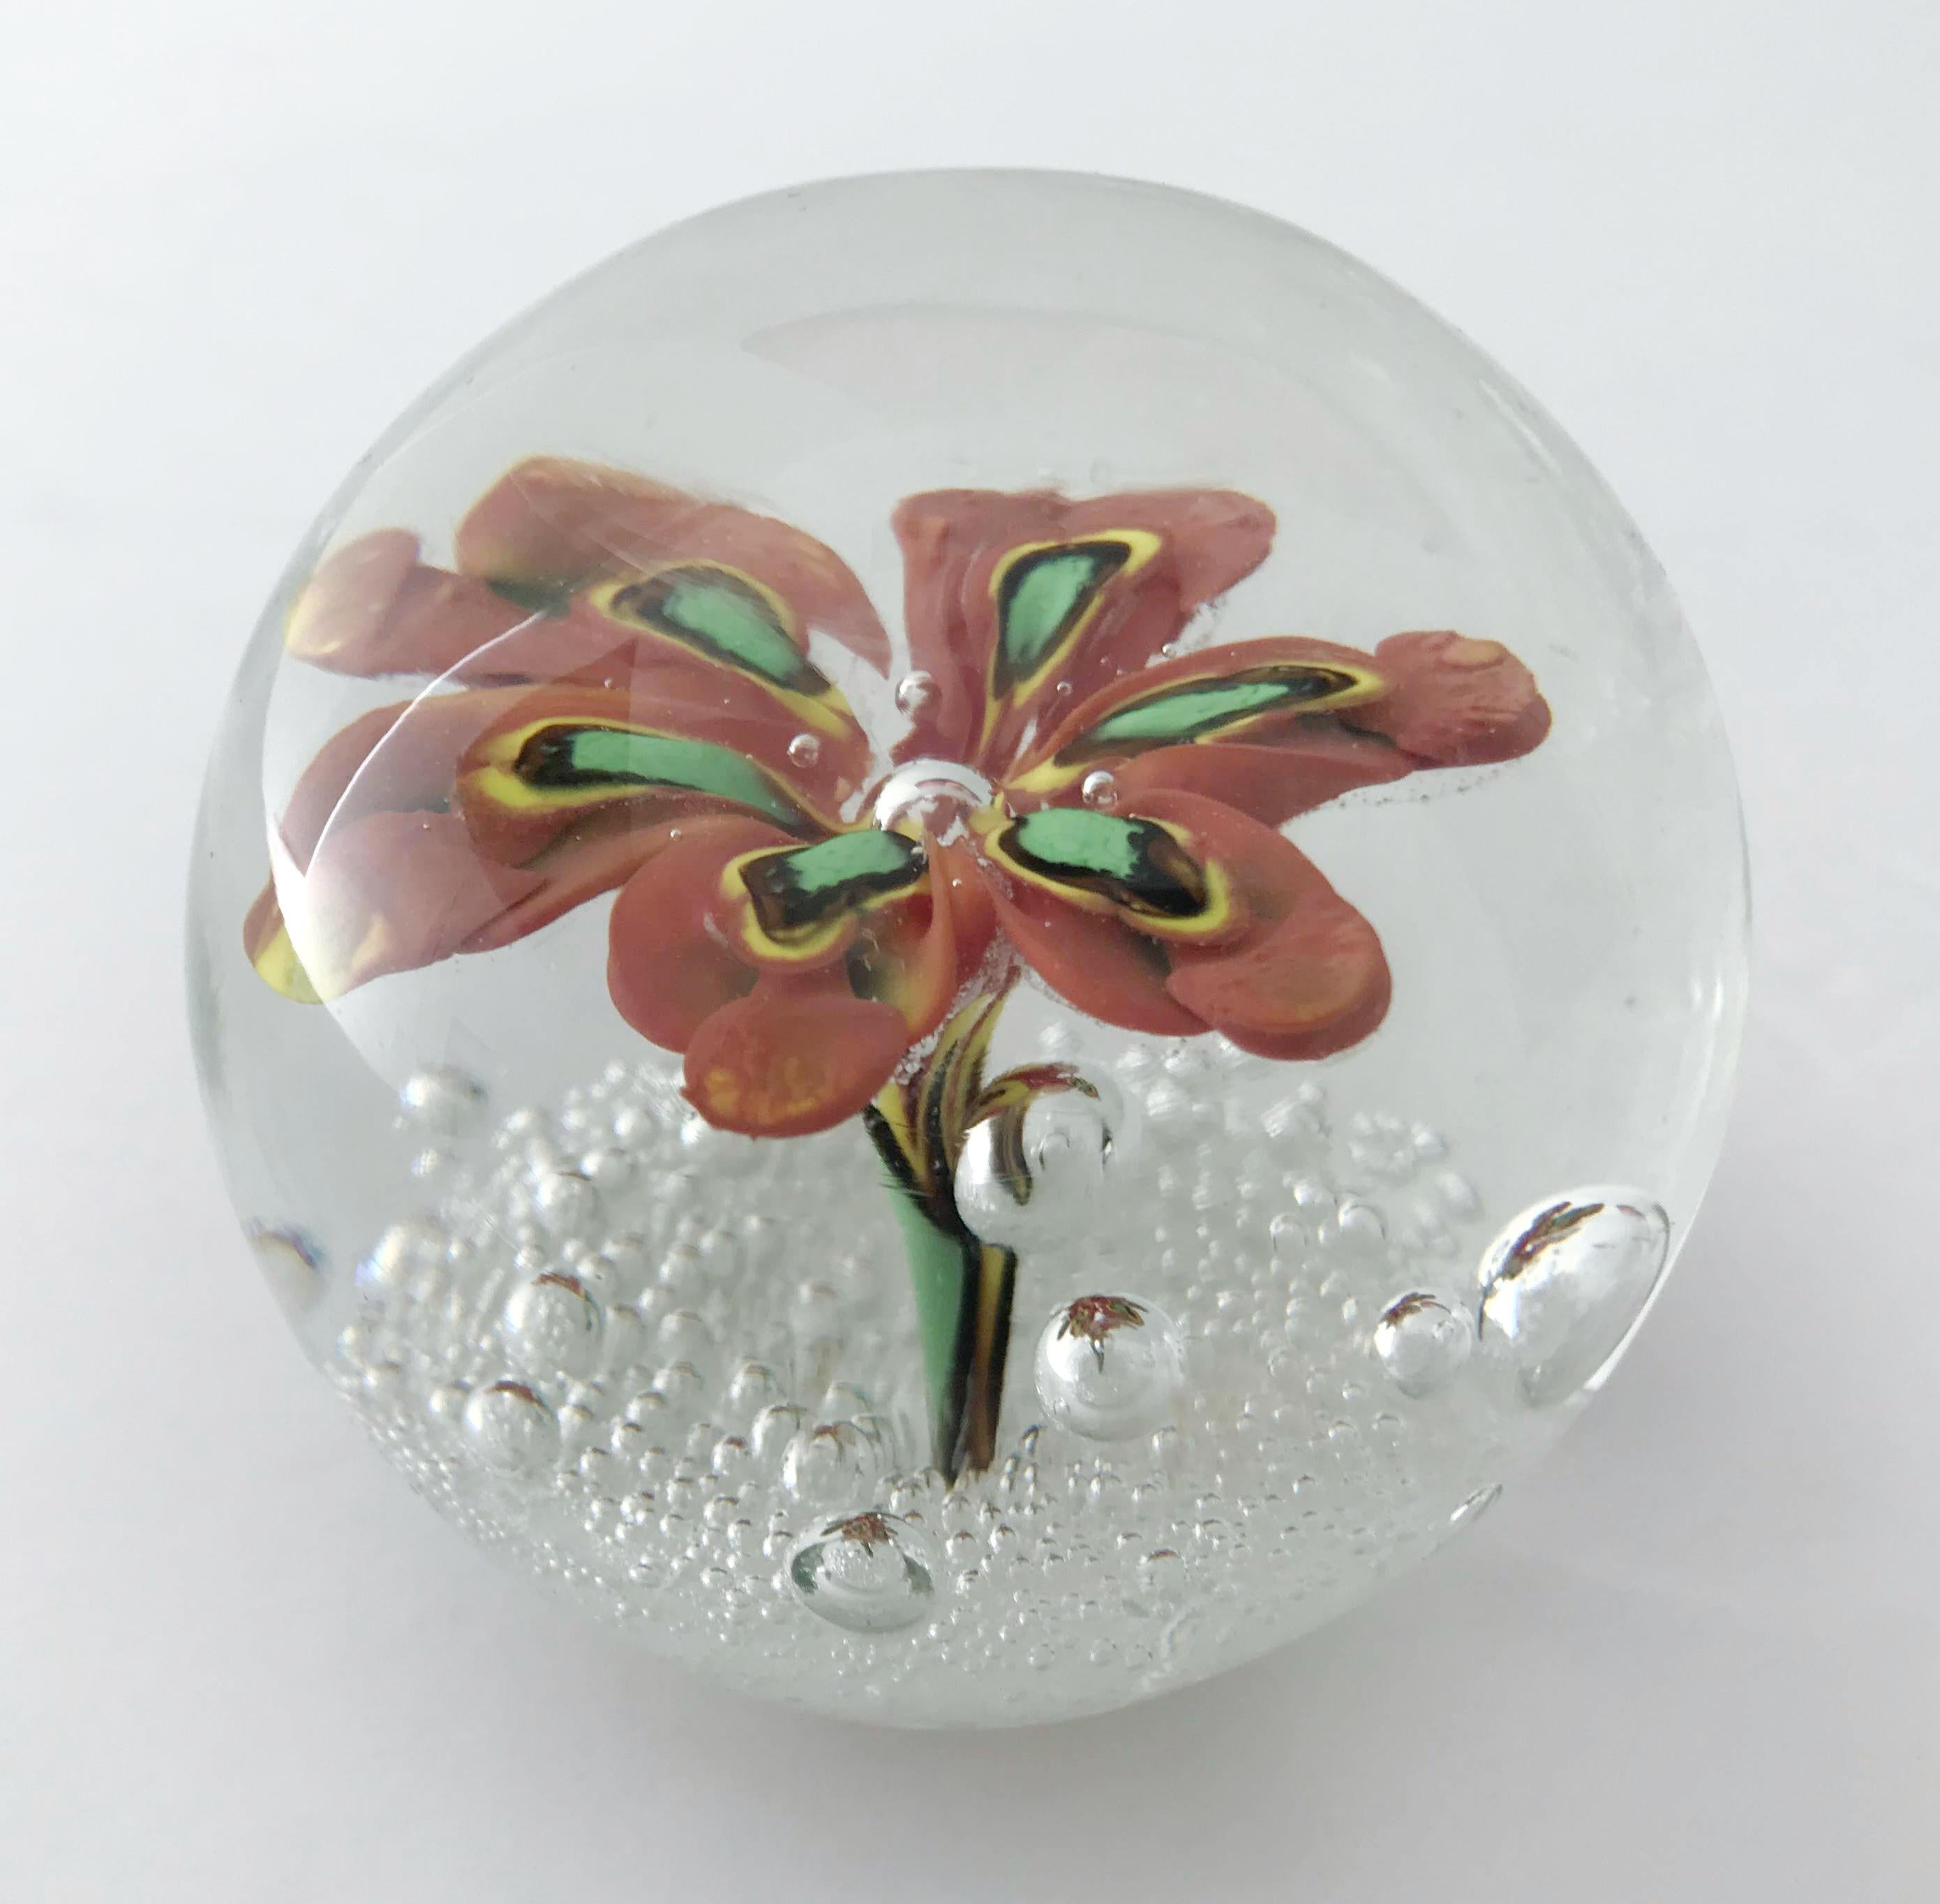 Vintage Italian Murano glass paperweight with a large hand blown flower in red, yellow and green and small bubbles / Made in Italy, circa 1960s
Original sticker at the base
Measures: diameter 2.5 inches / height 2.25 inches
1 in stock in Palm